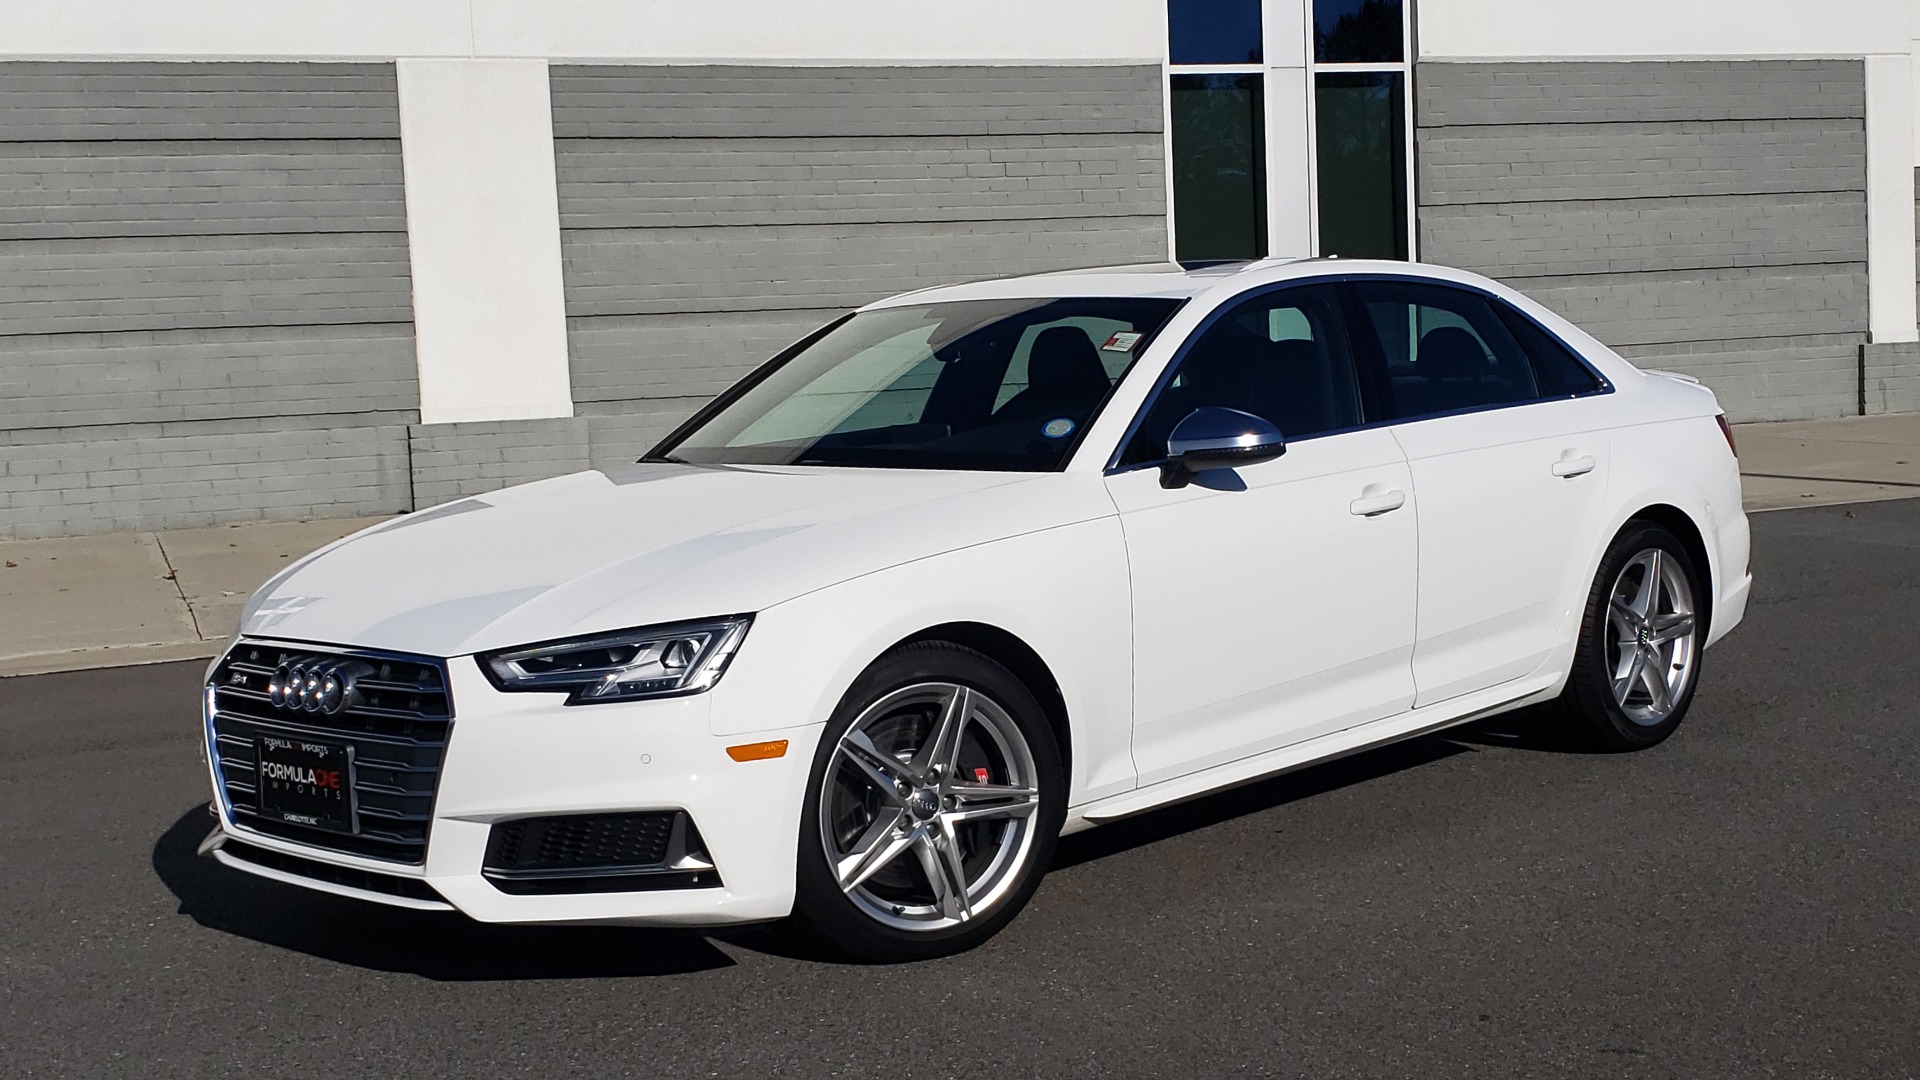 Used 2018 Audi S4 PREMIUM PLUS / TECH PKG / NAV / CLD WTHR / REARVIEW for sale Sold at Formula Imports in Charlotte NC 28227 1